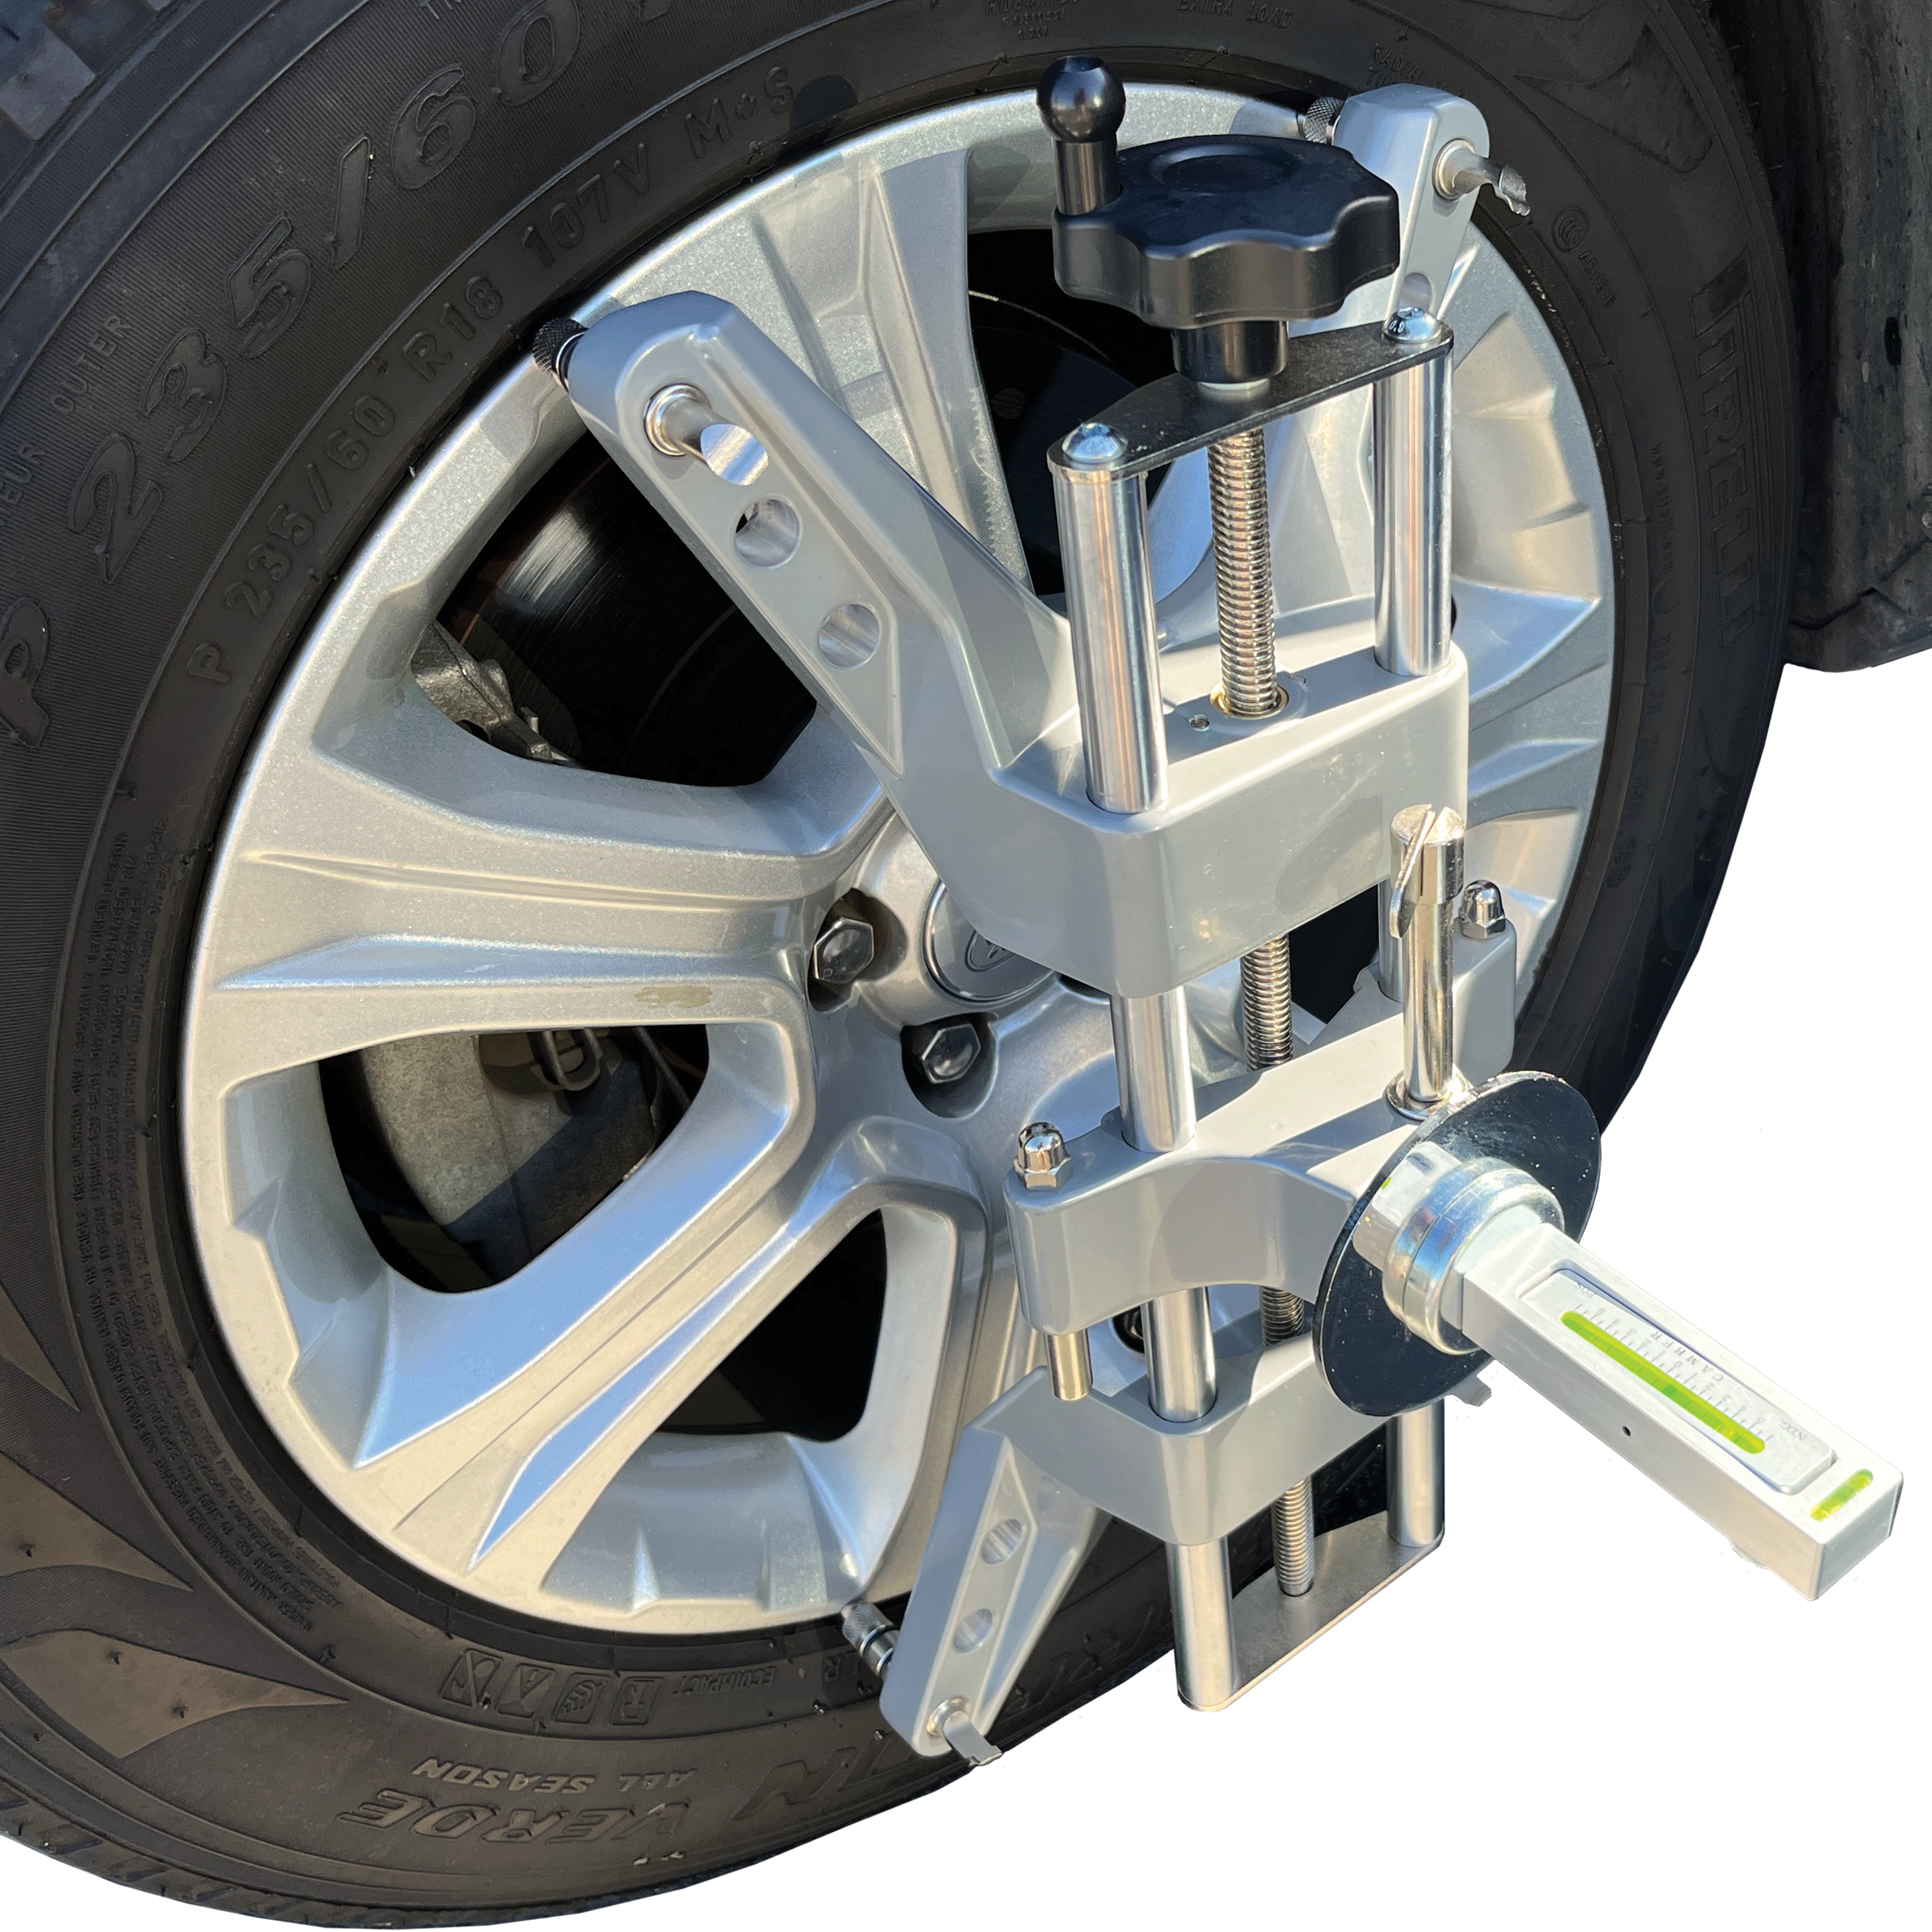 Picture of wheel clamp on a car wheel with a camber gauge attached